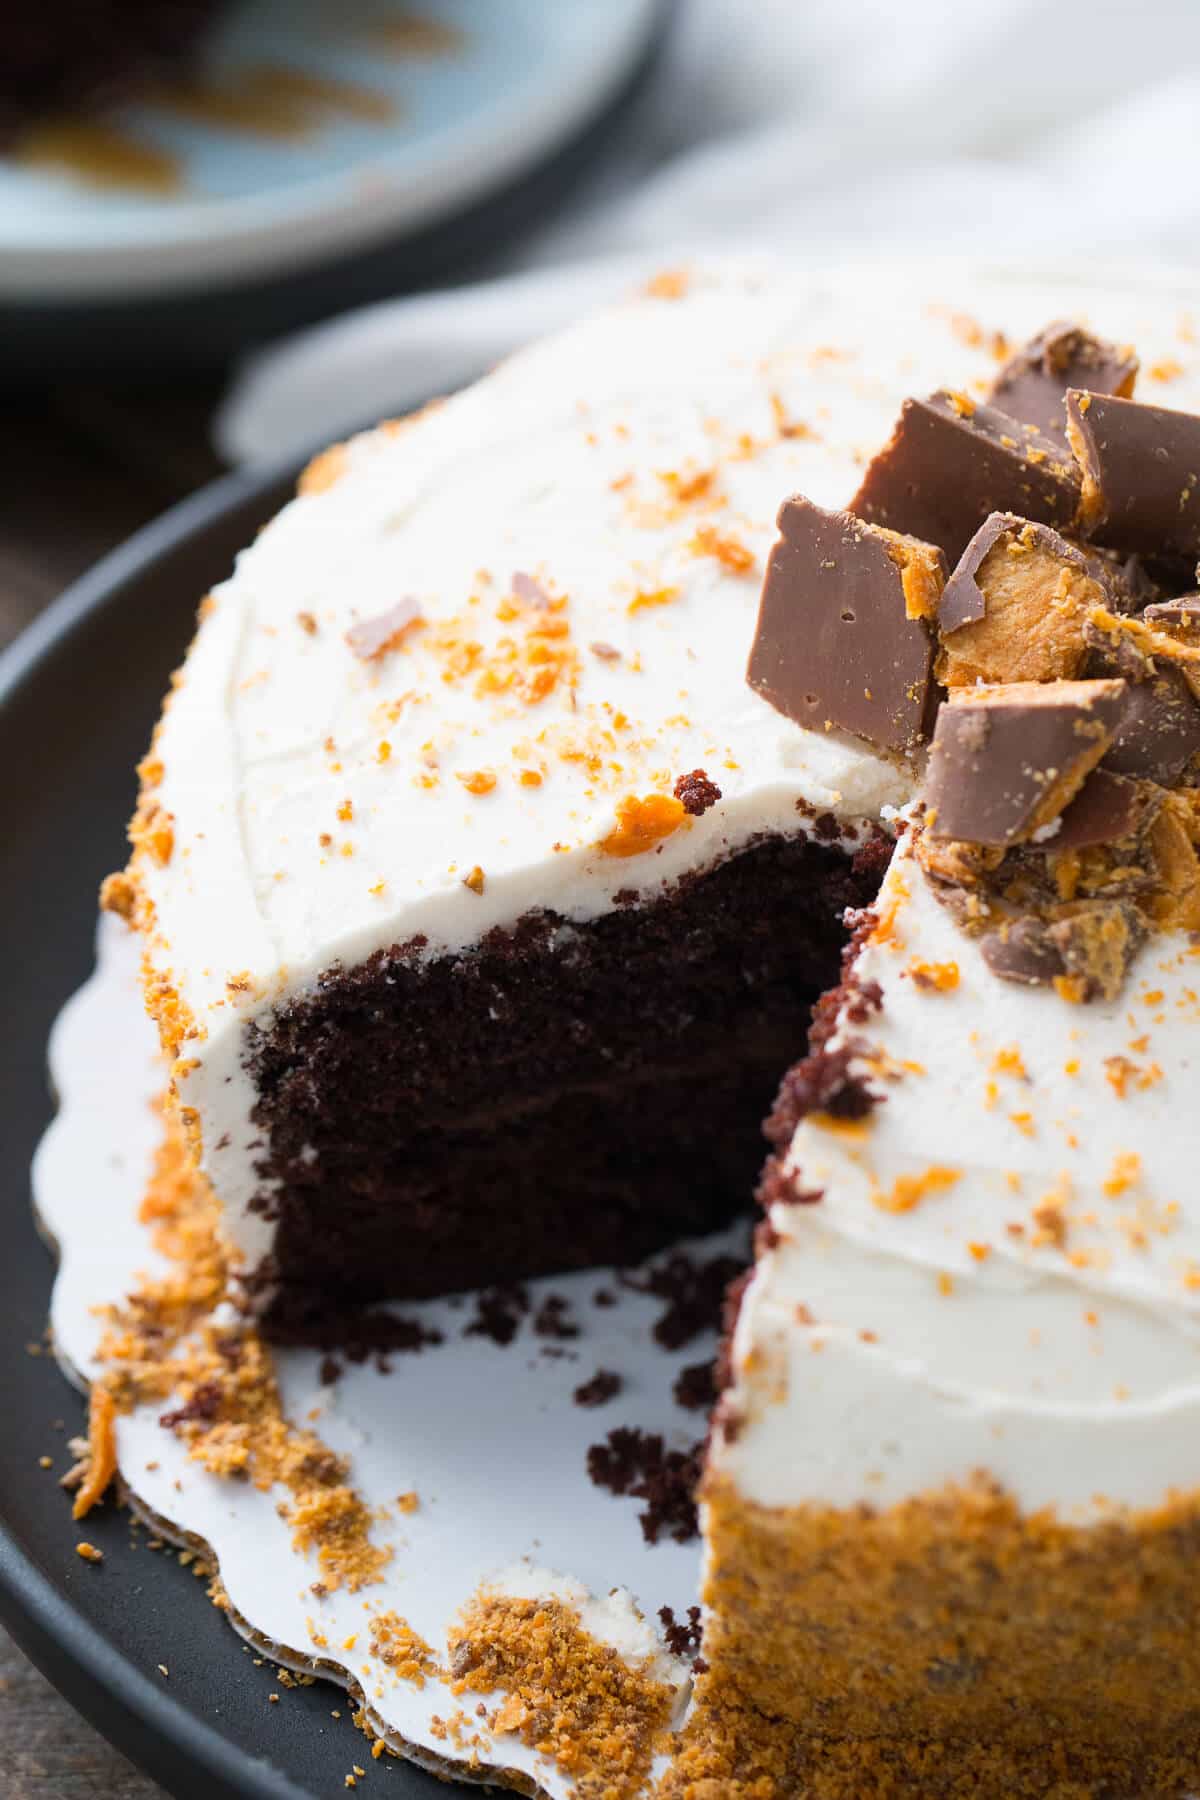 This Butterfinger cake is two layers of decadence!  A rich chocolate cake is layered and filled with chocolate ganache and topped with Buttercream and Butterfingers!